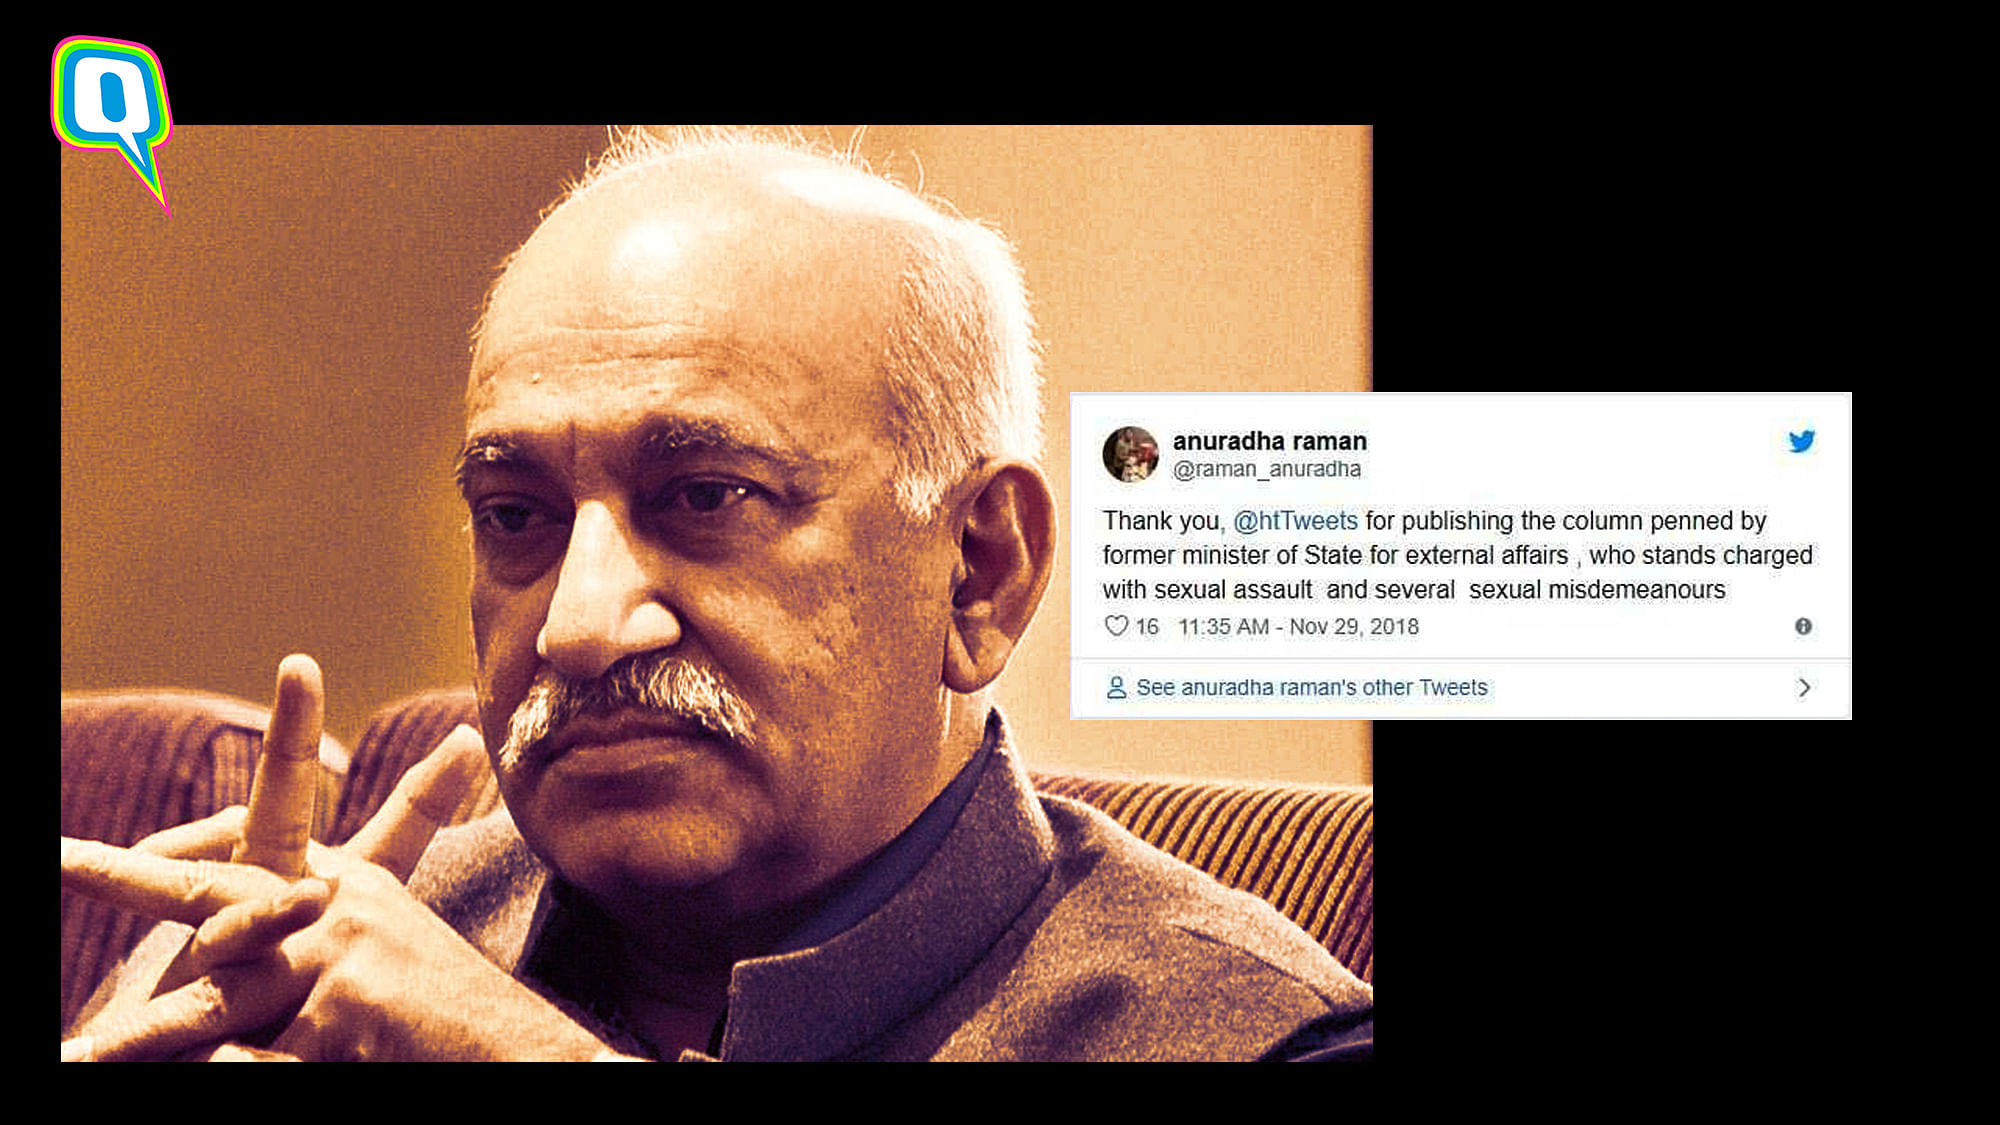 MJ Akbar who is accused of sexual harassment, gets to publish an article.